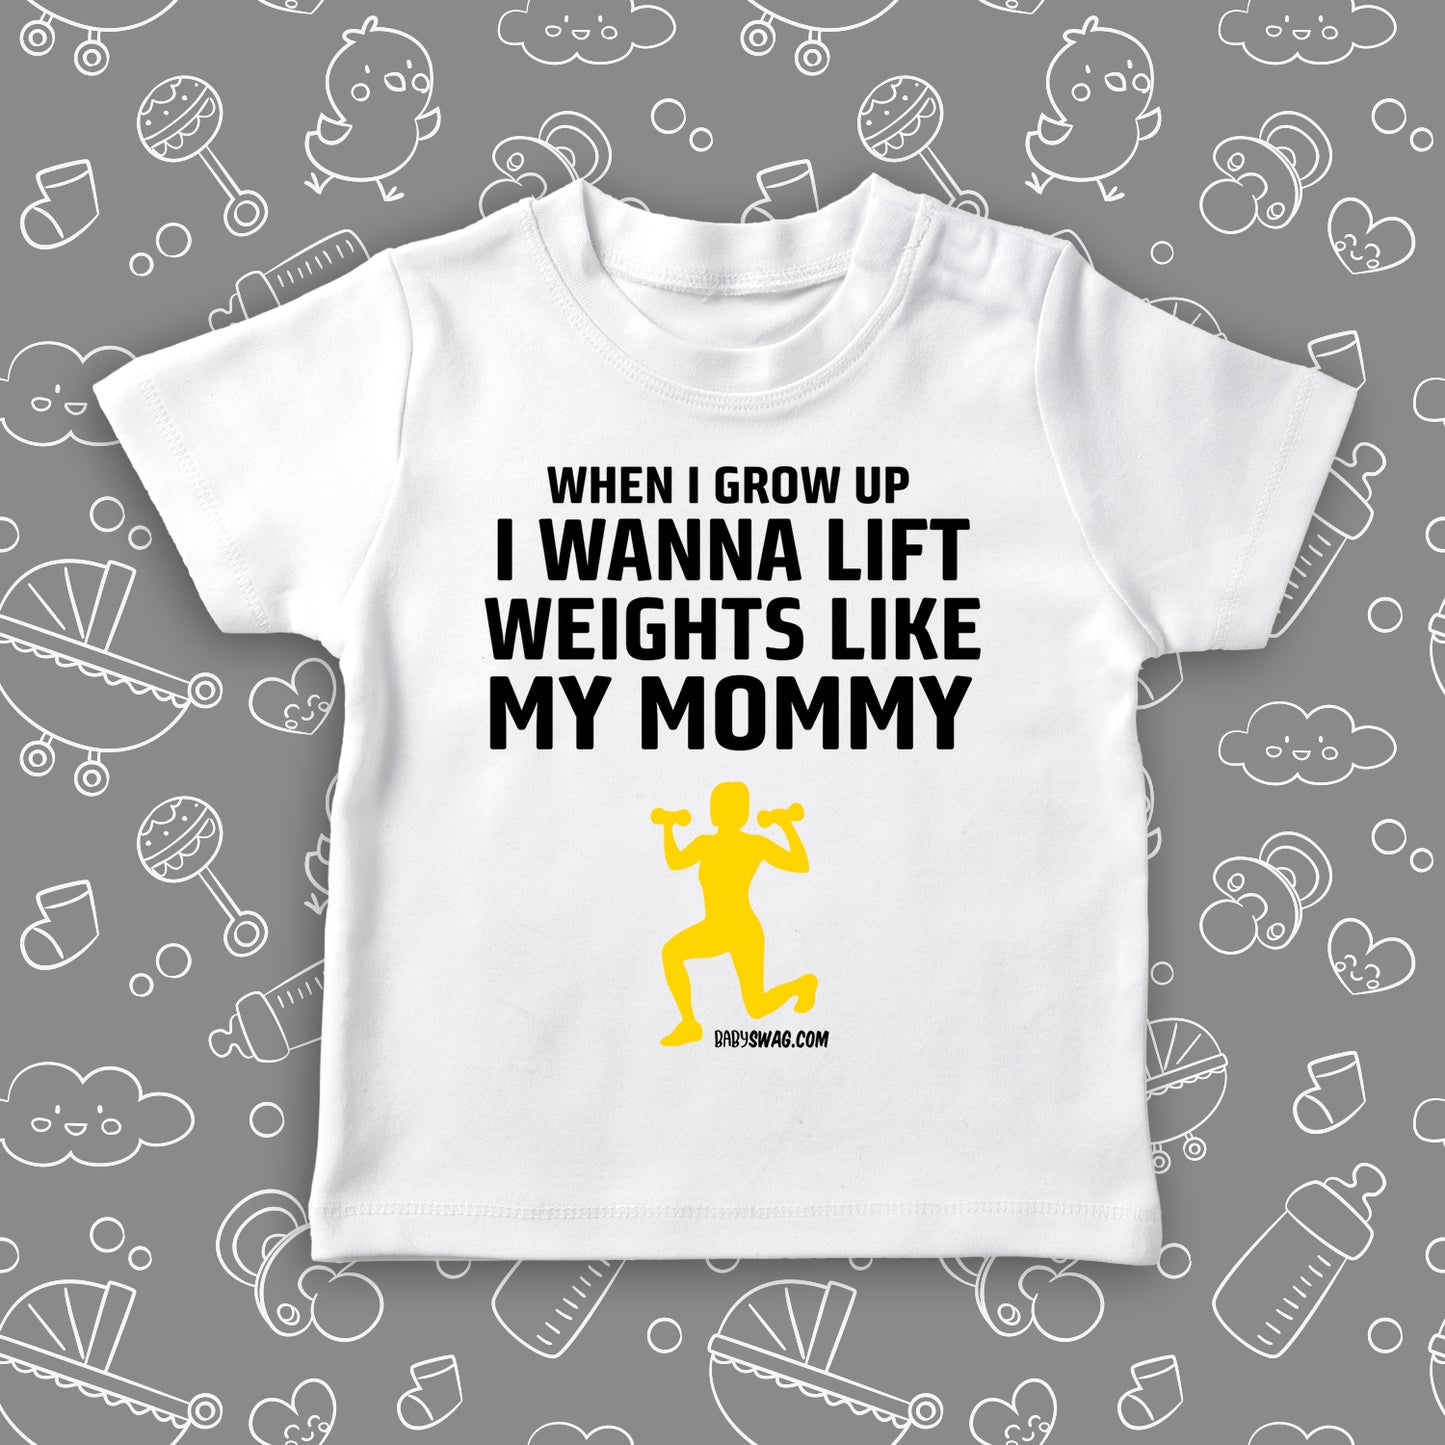 Funny toddler shirt with saying "When I Grow Up I Wanna Lift Weights LIke My Mommy" in white. 